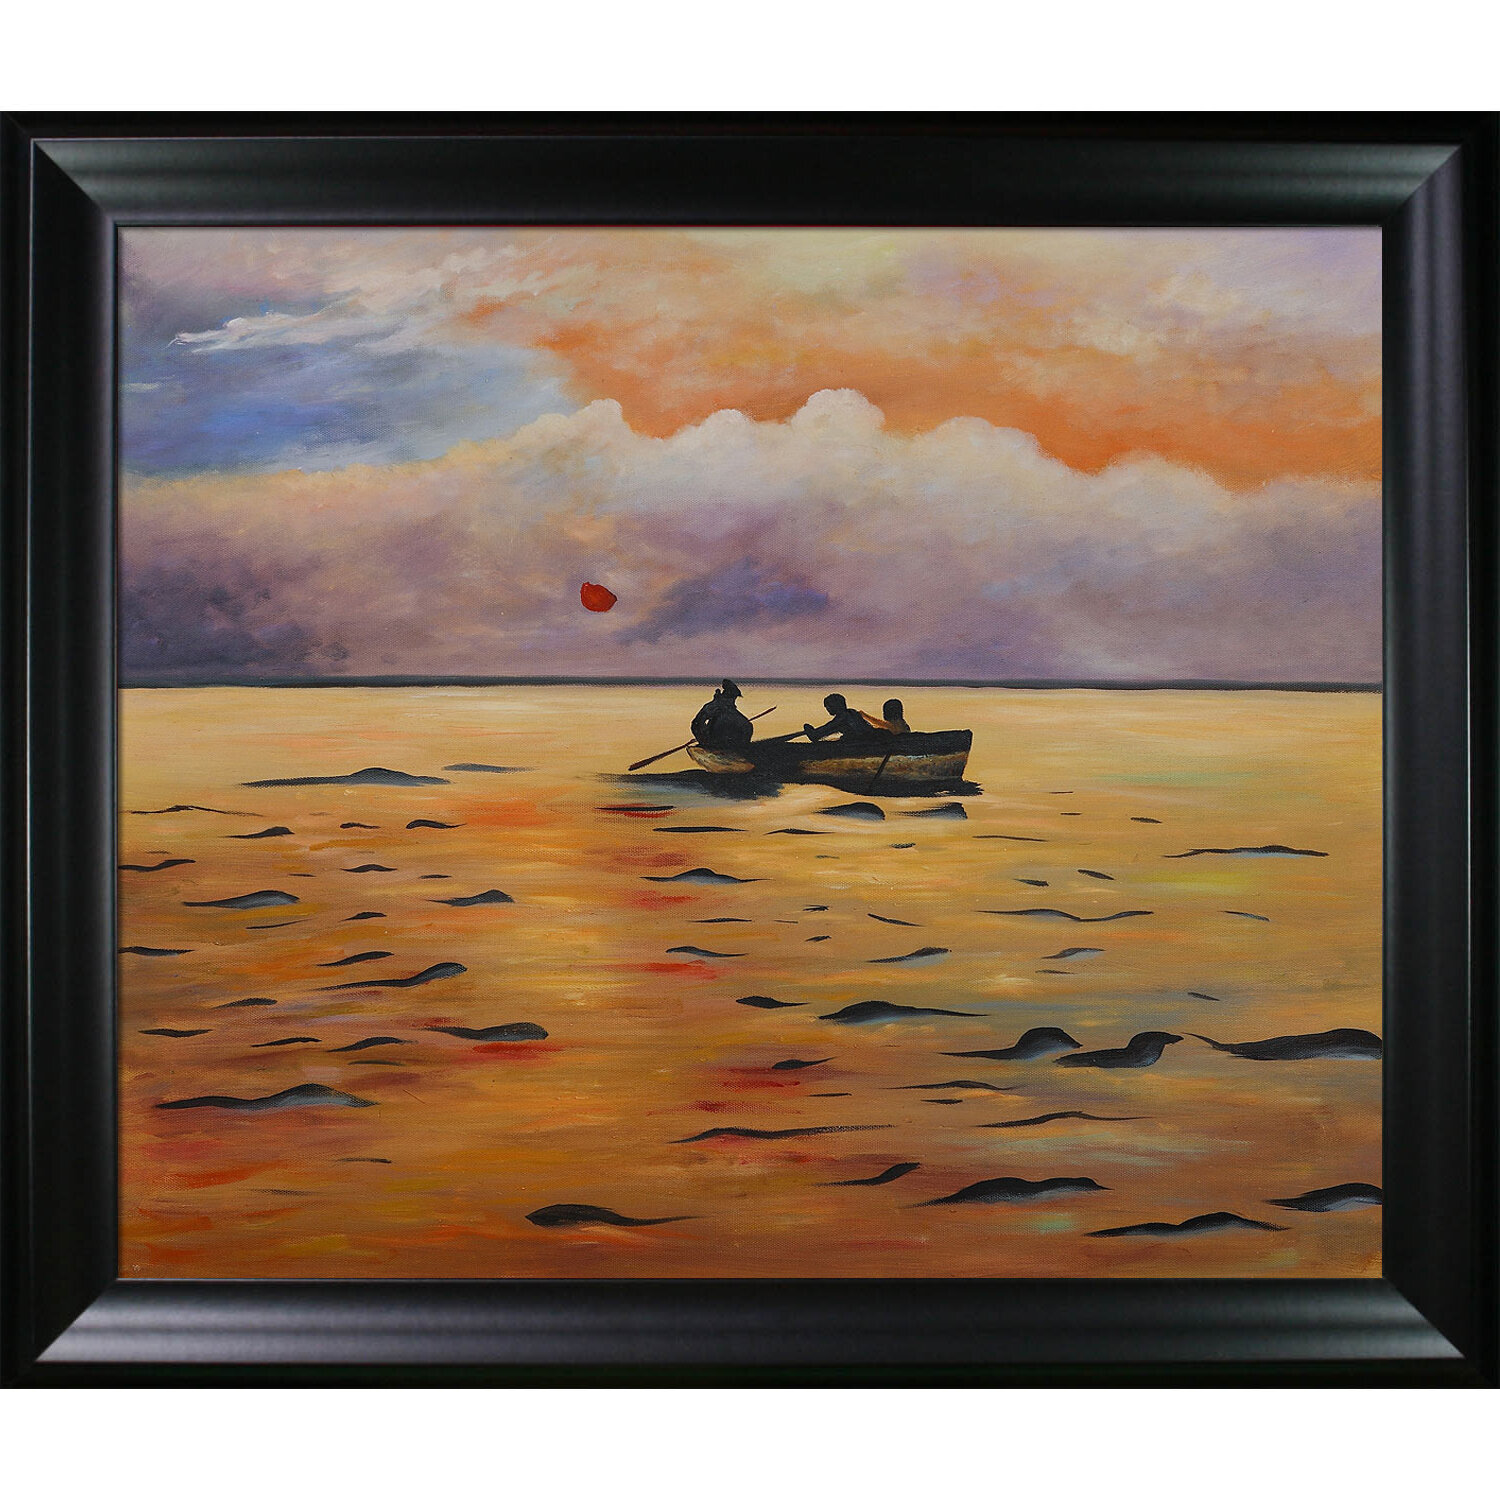 ROWING HOME CALM OCEAN SEAS SUNSET WINSLOW HOMER PAINTING ART REAL CANVAS PRINT 